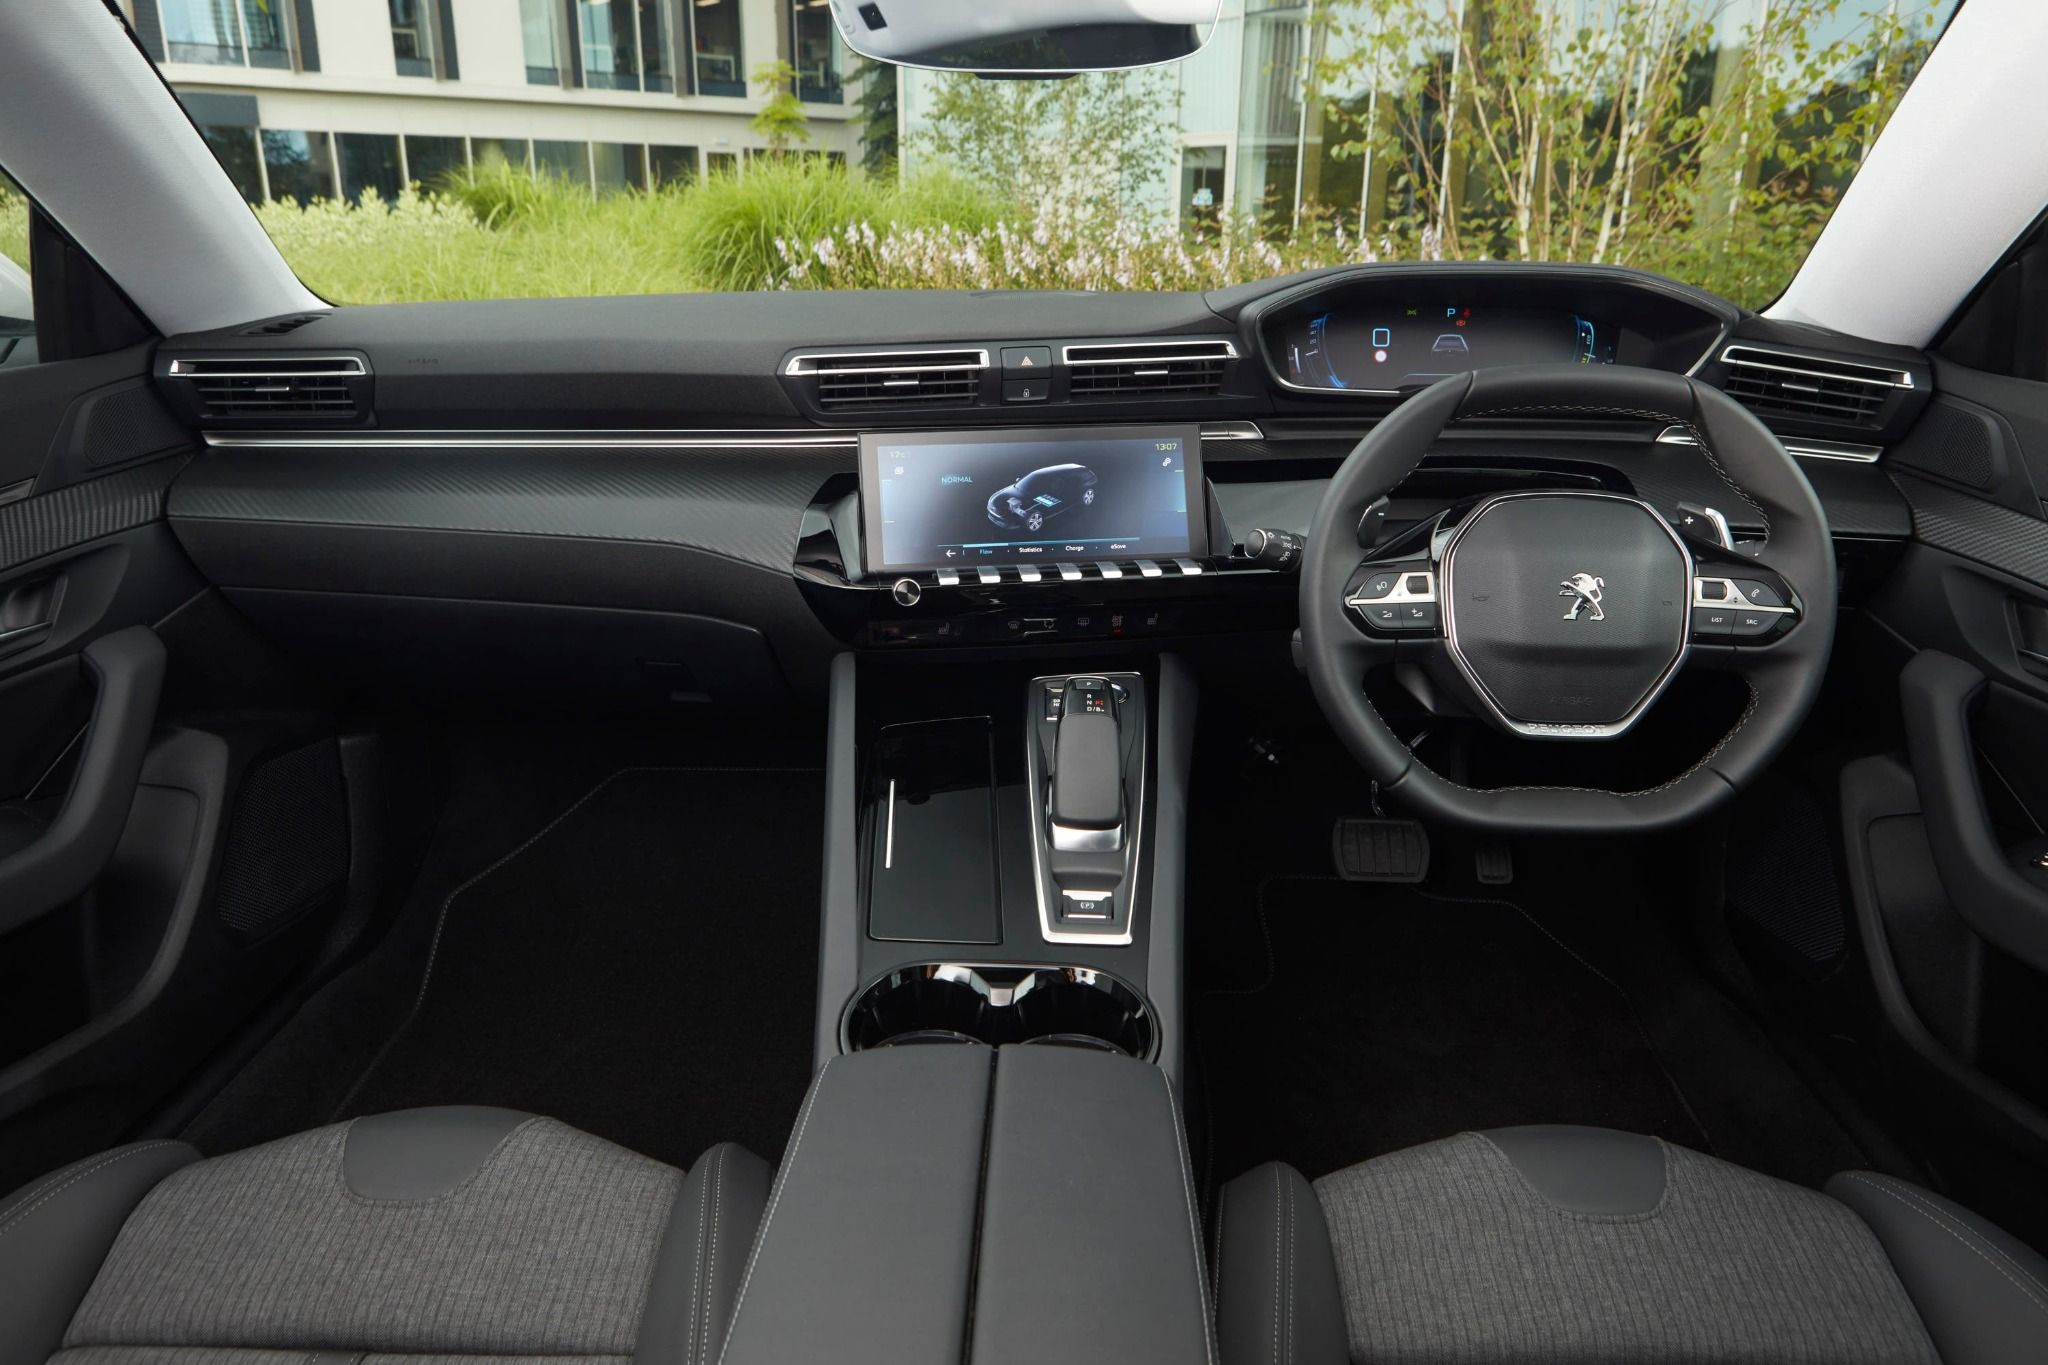 Peugeot 508 interior from rear passenger view